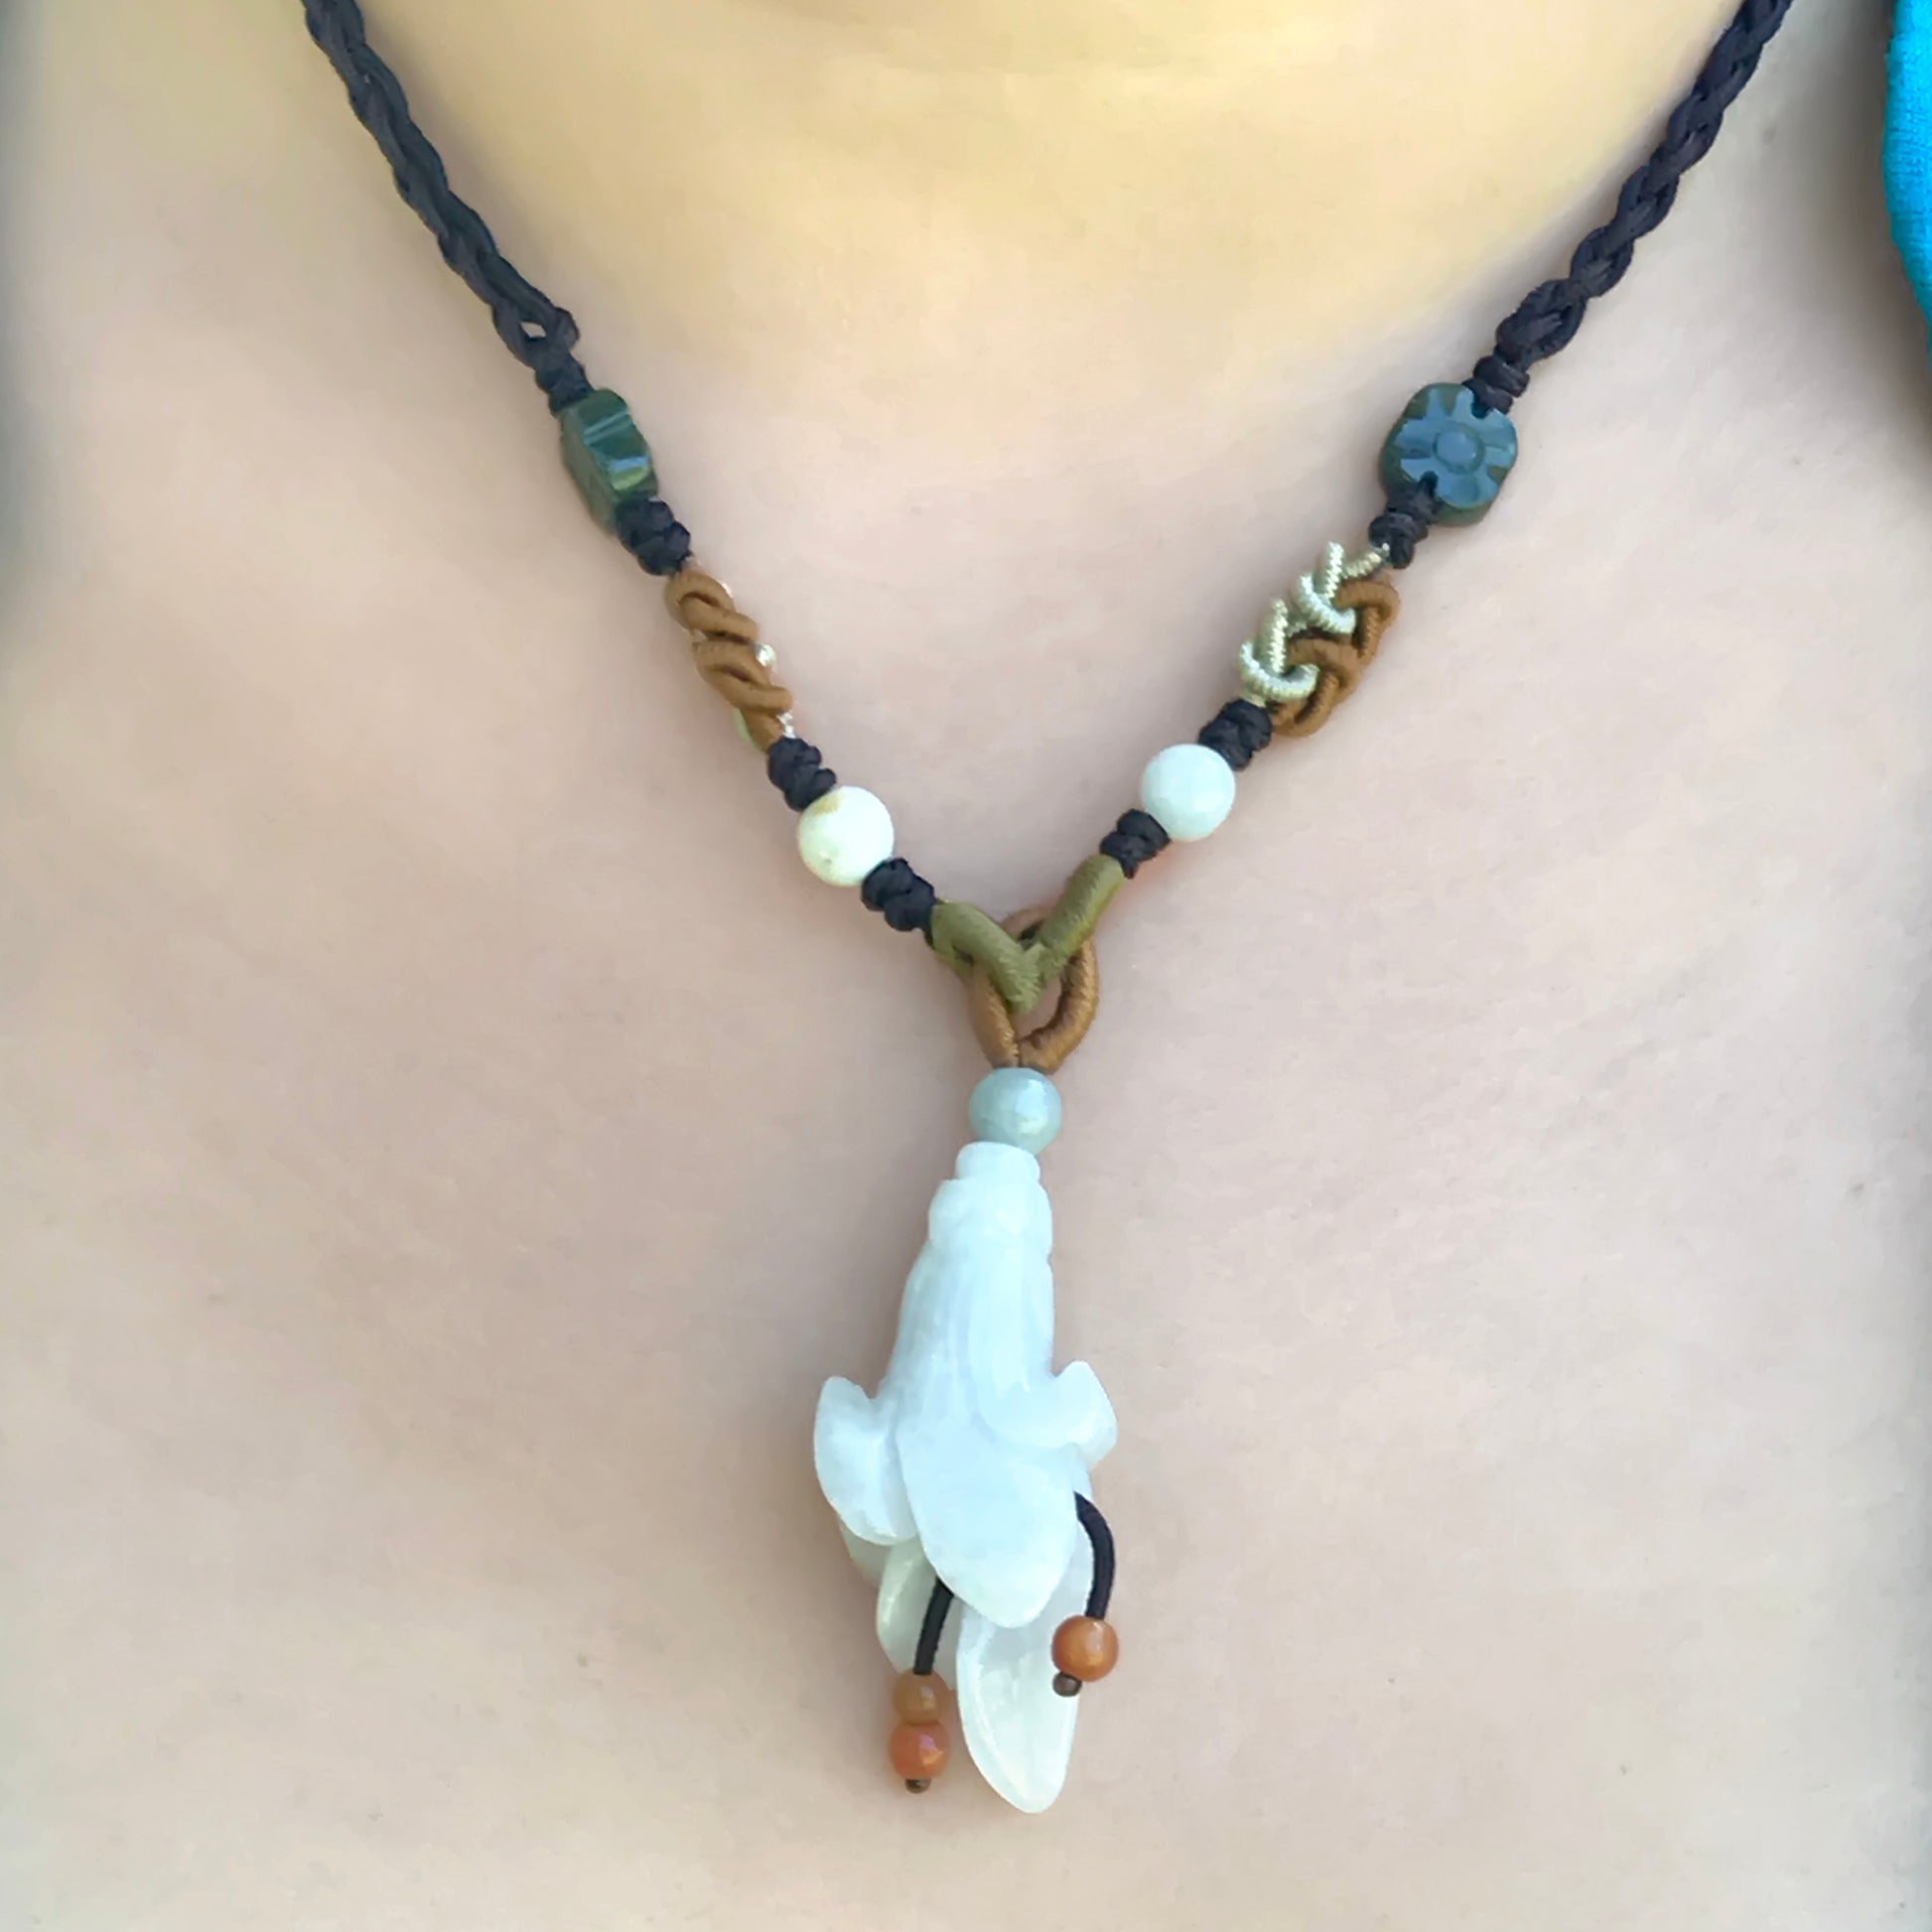 Get a One-of-a-Kind Jewelry Piece with Bellflower Jade Necklace made with Brown Cord